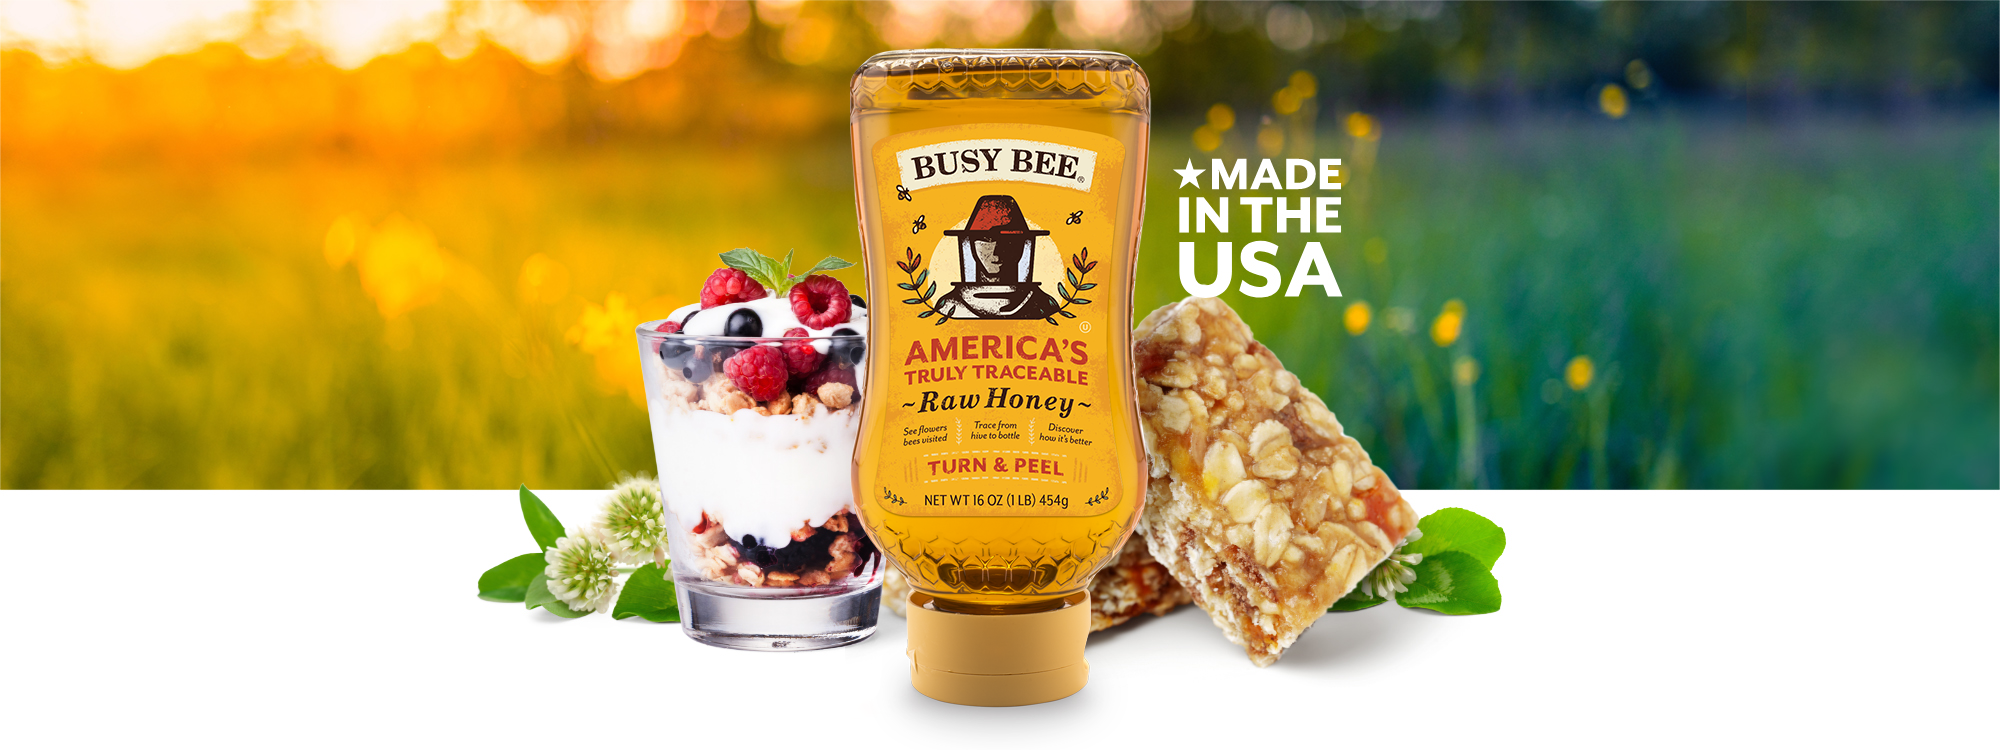 yogurt parfait, granola bars and a bottle of Busy Bee Honey in the foreground. Busy Bee Unfiltered Raw Honey Made in the U.S.A.  Sunny field in background